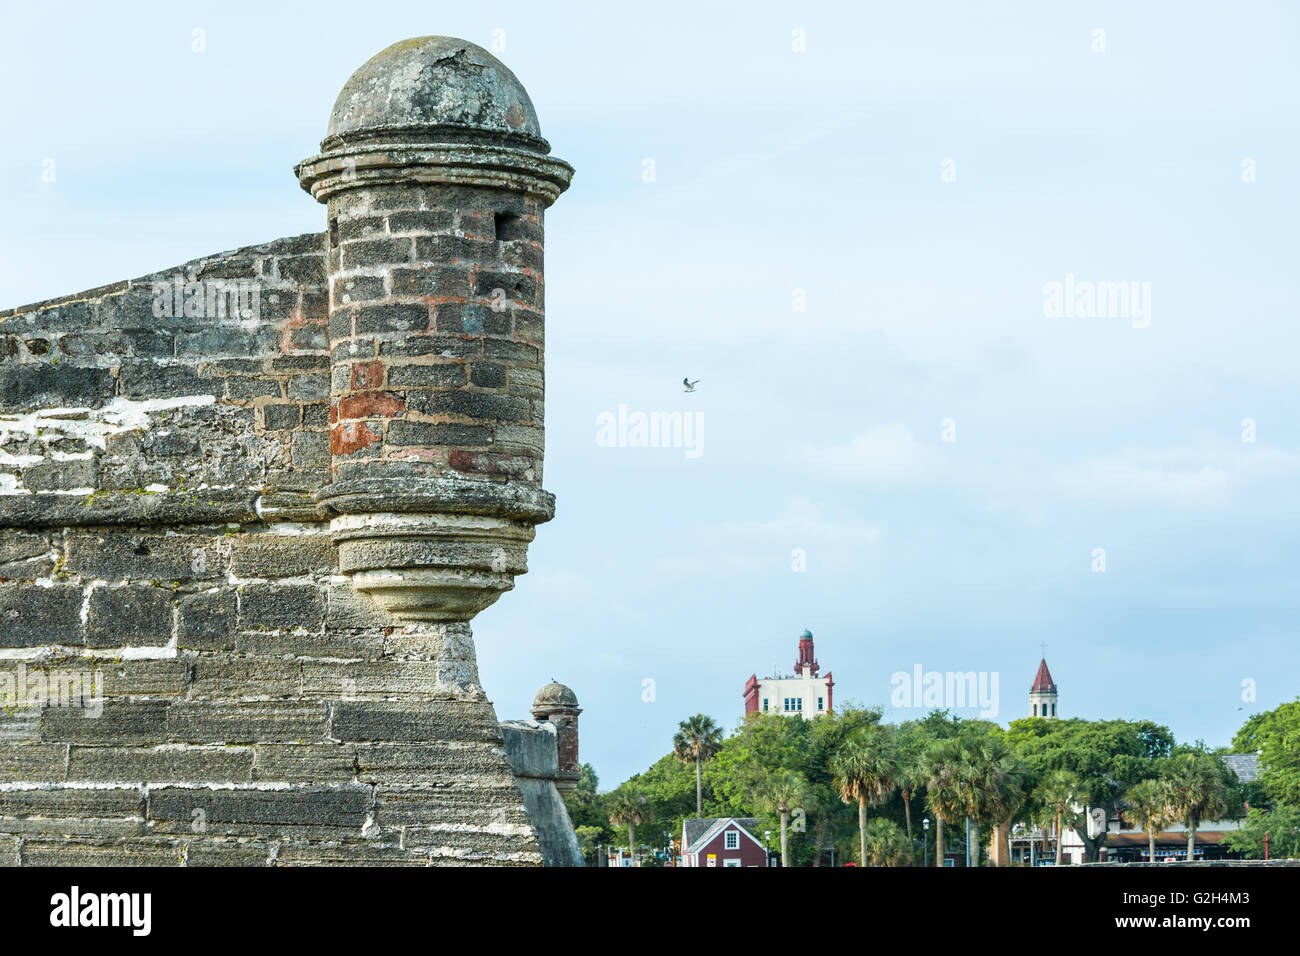 Coquina stone turret of Castillo de San Marcos fort with downtown St. Augustine, Florida in background. (USA) Stock Photo